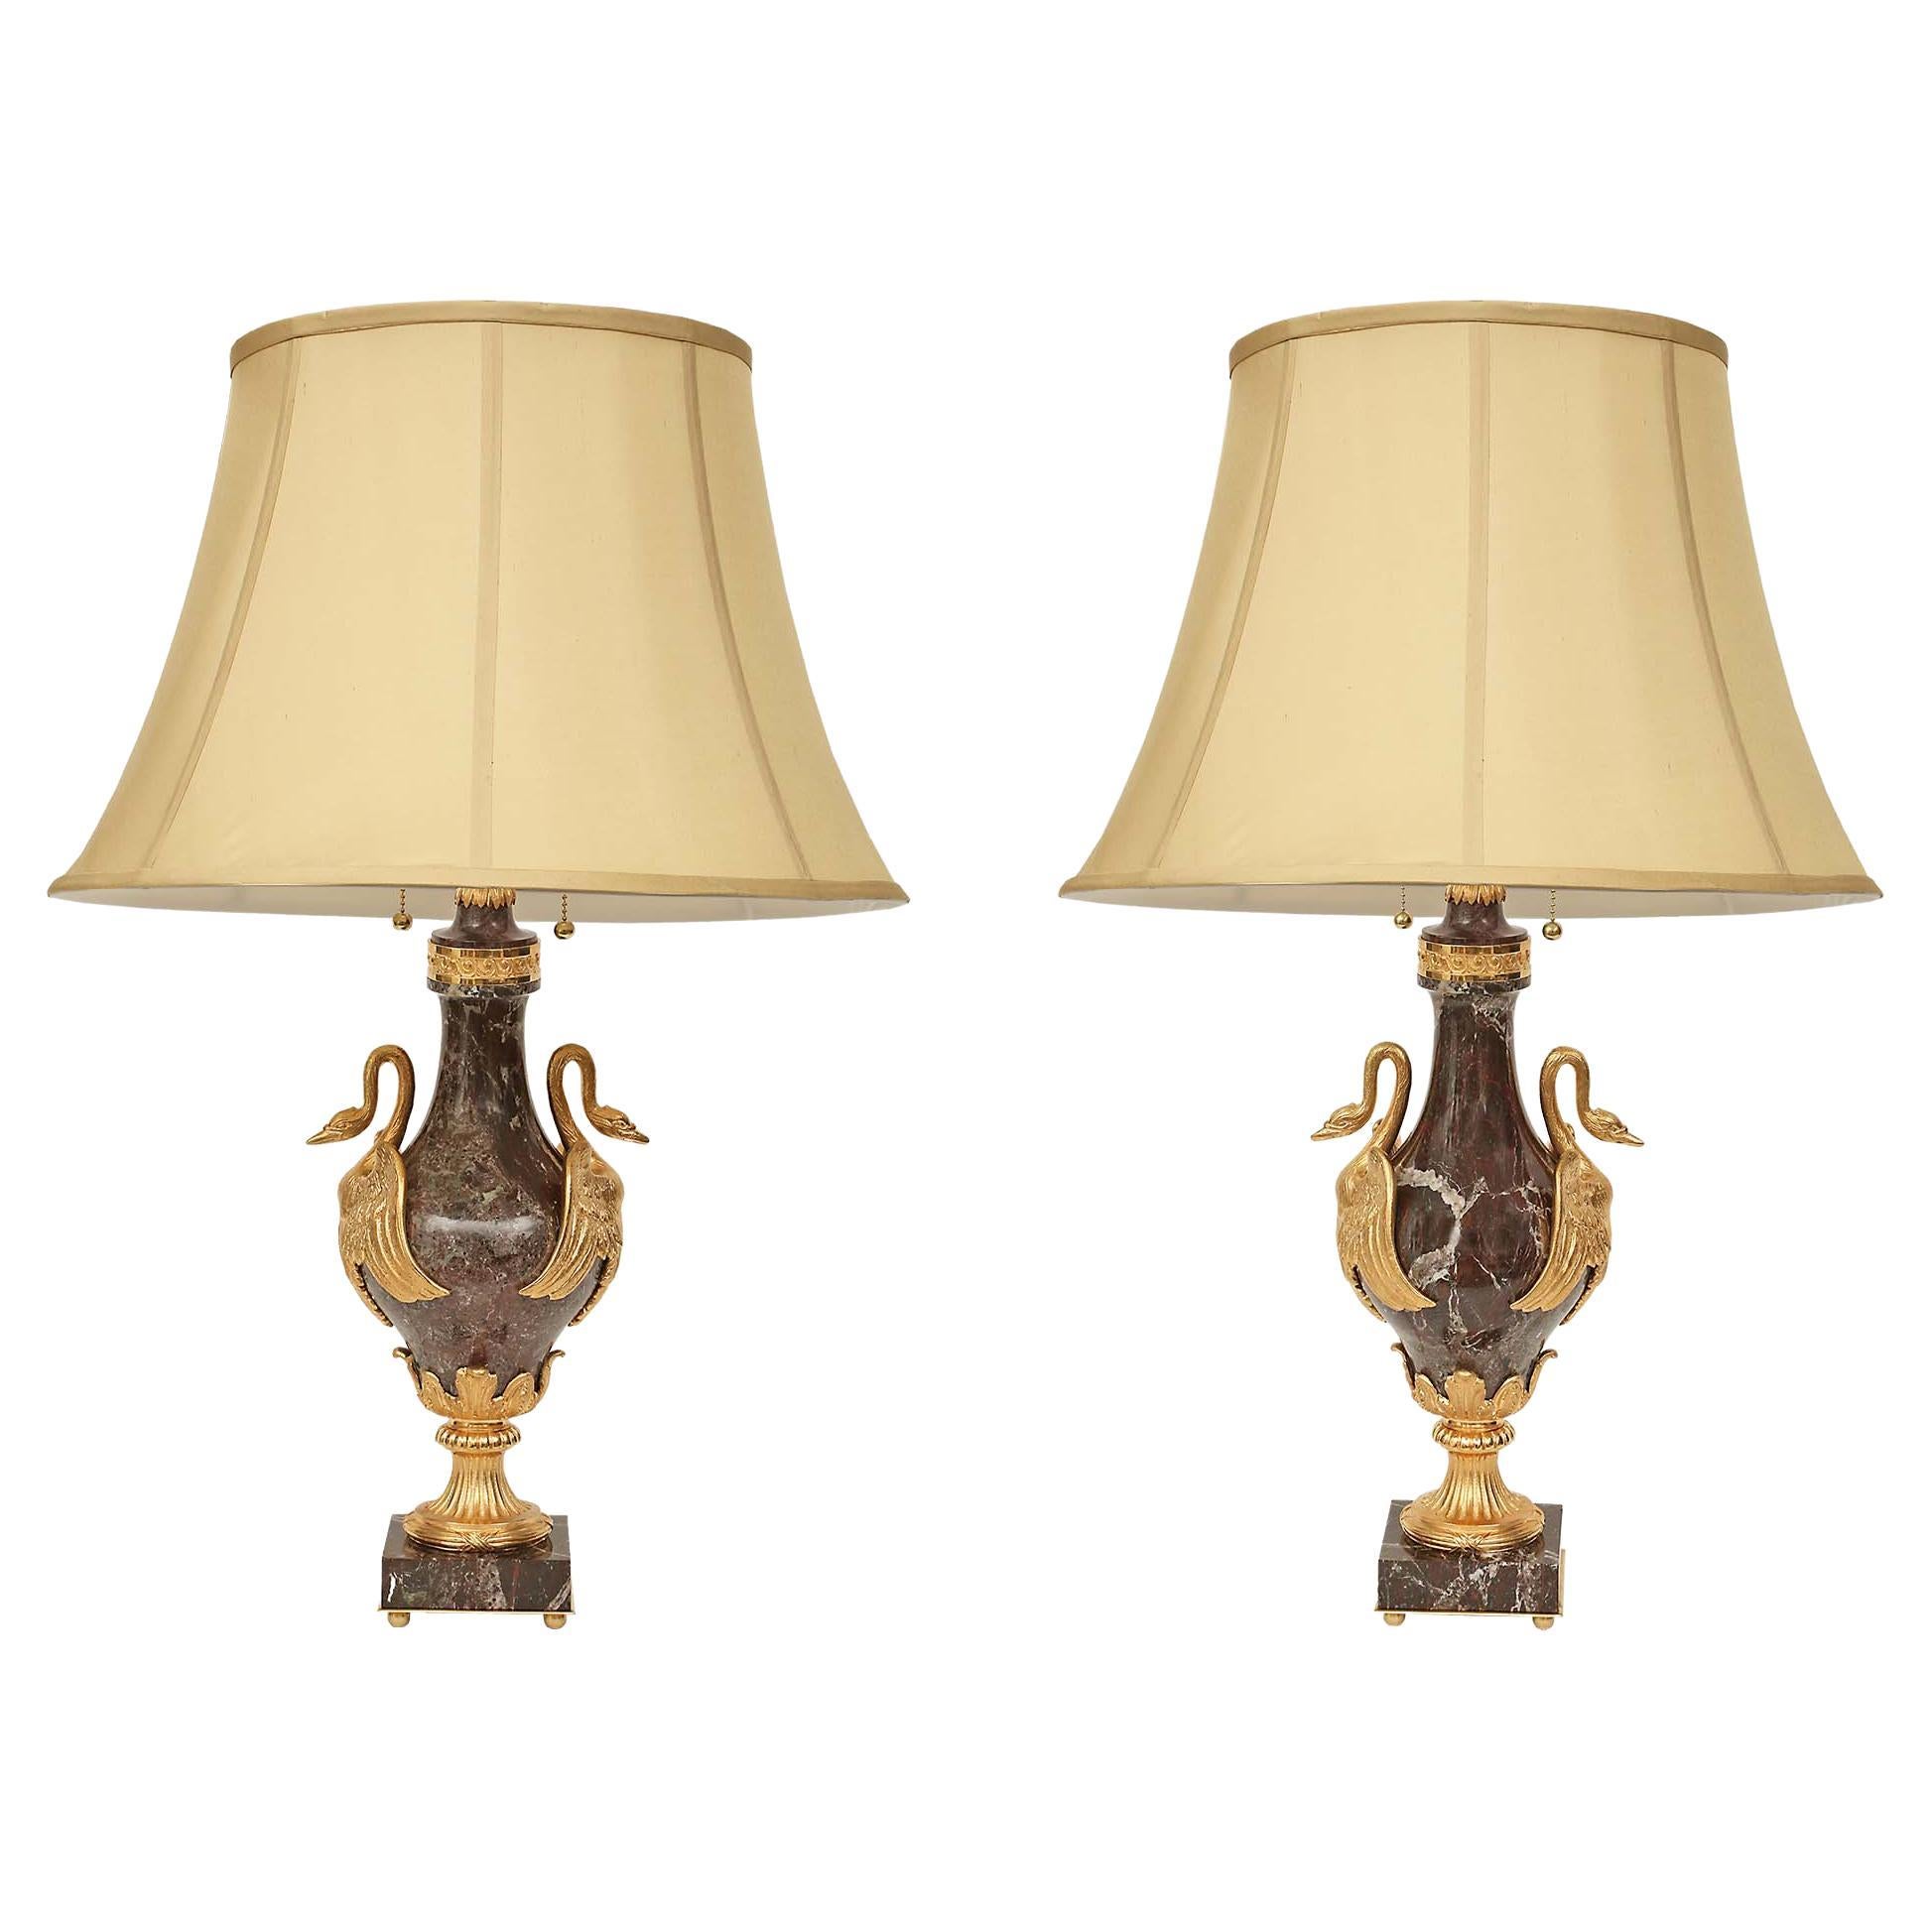 Pair of French 19th Century Neo-Classical St. Marble and Ormolu Lamps